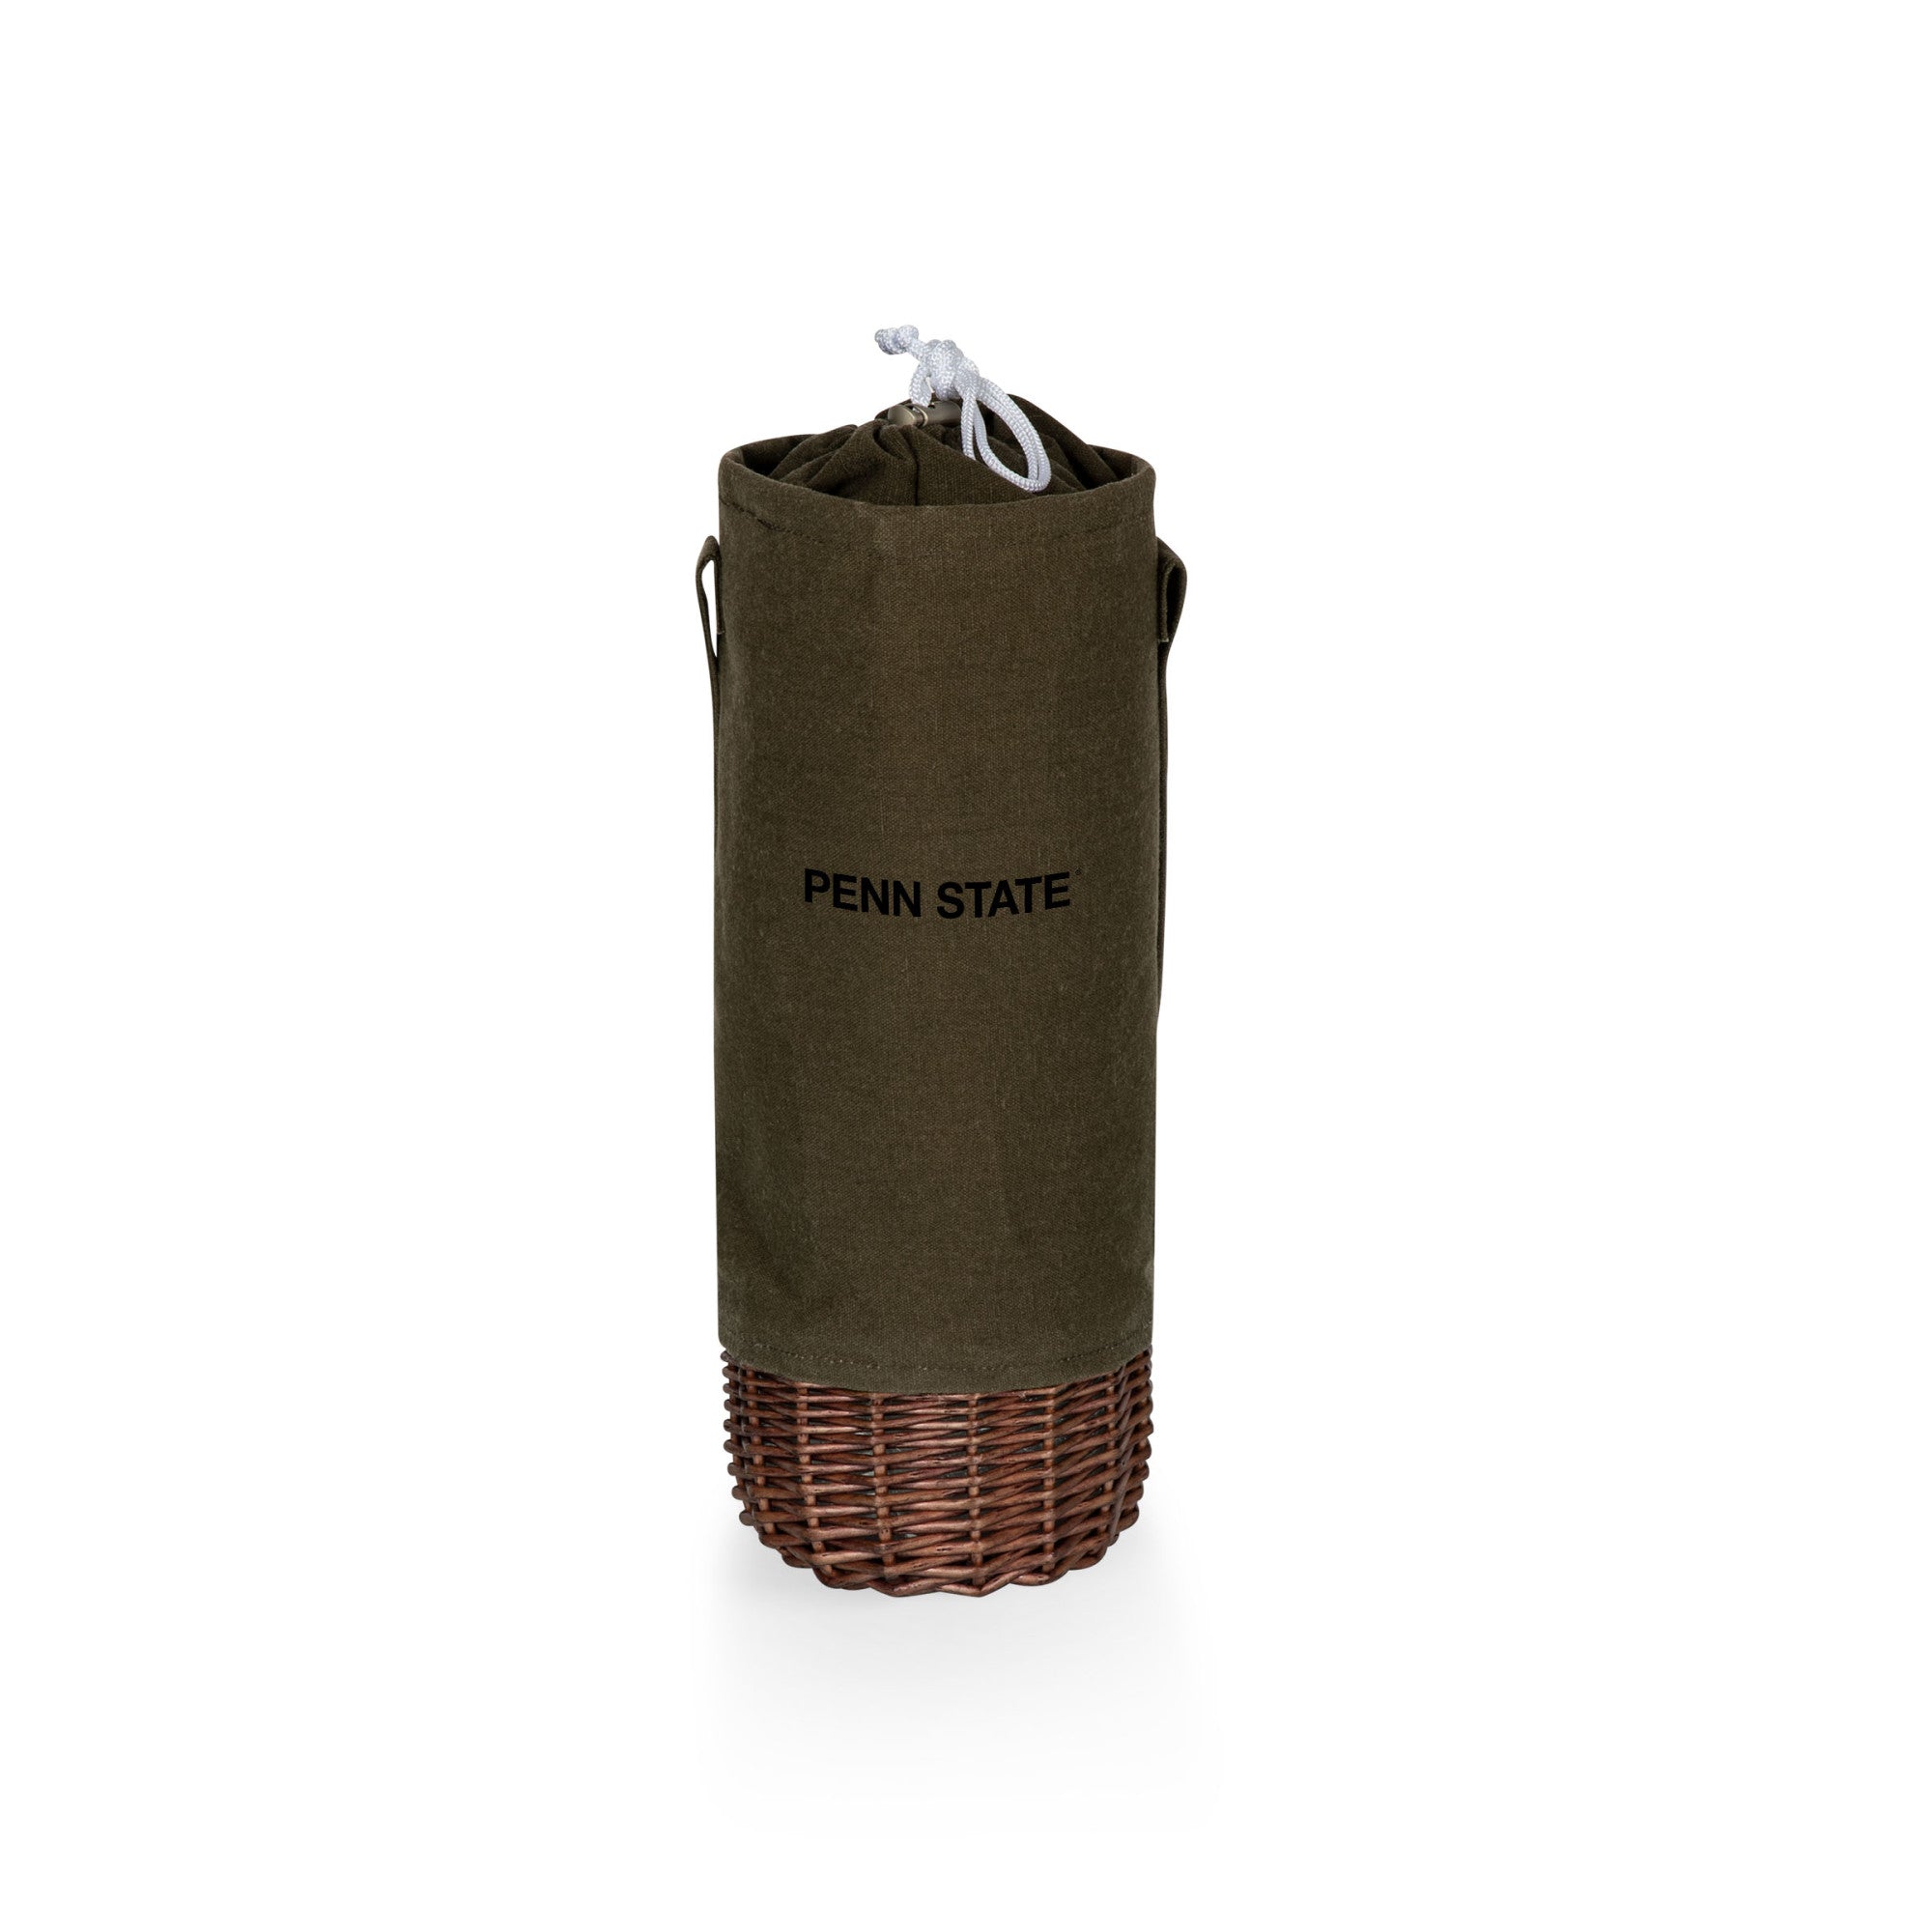 Penn State Nittany Lions - Malbec Insulated Canvas and Willow Wine Bottle Basket